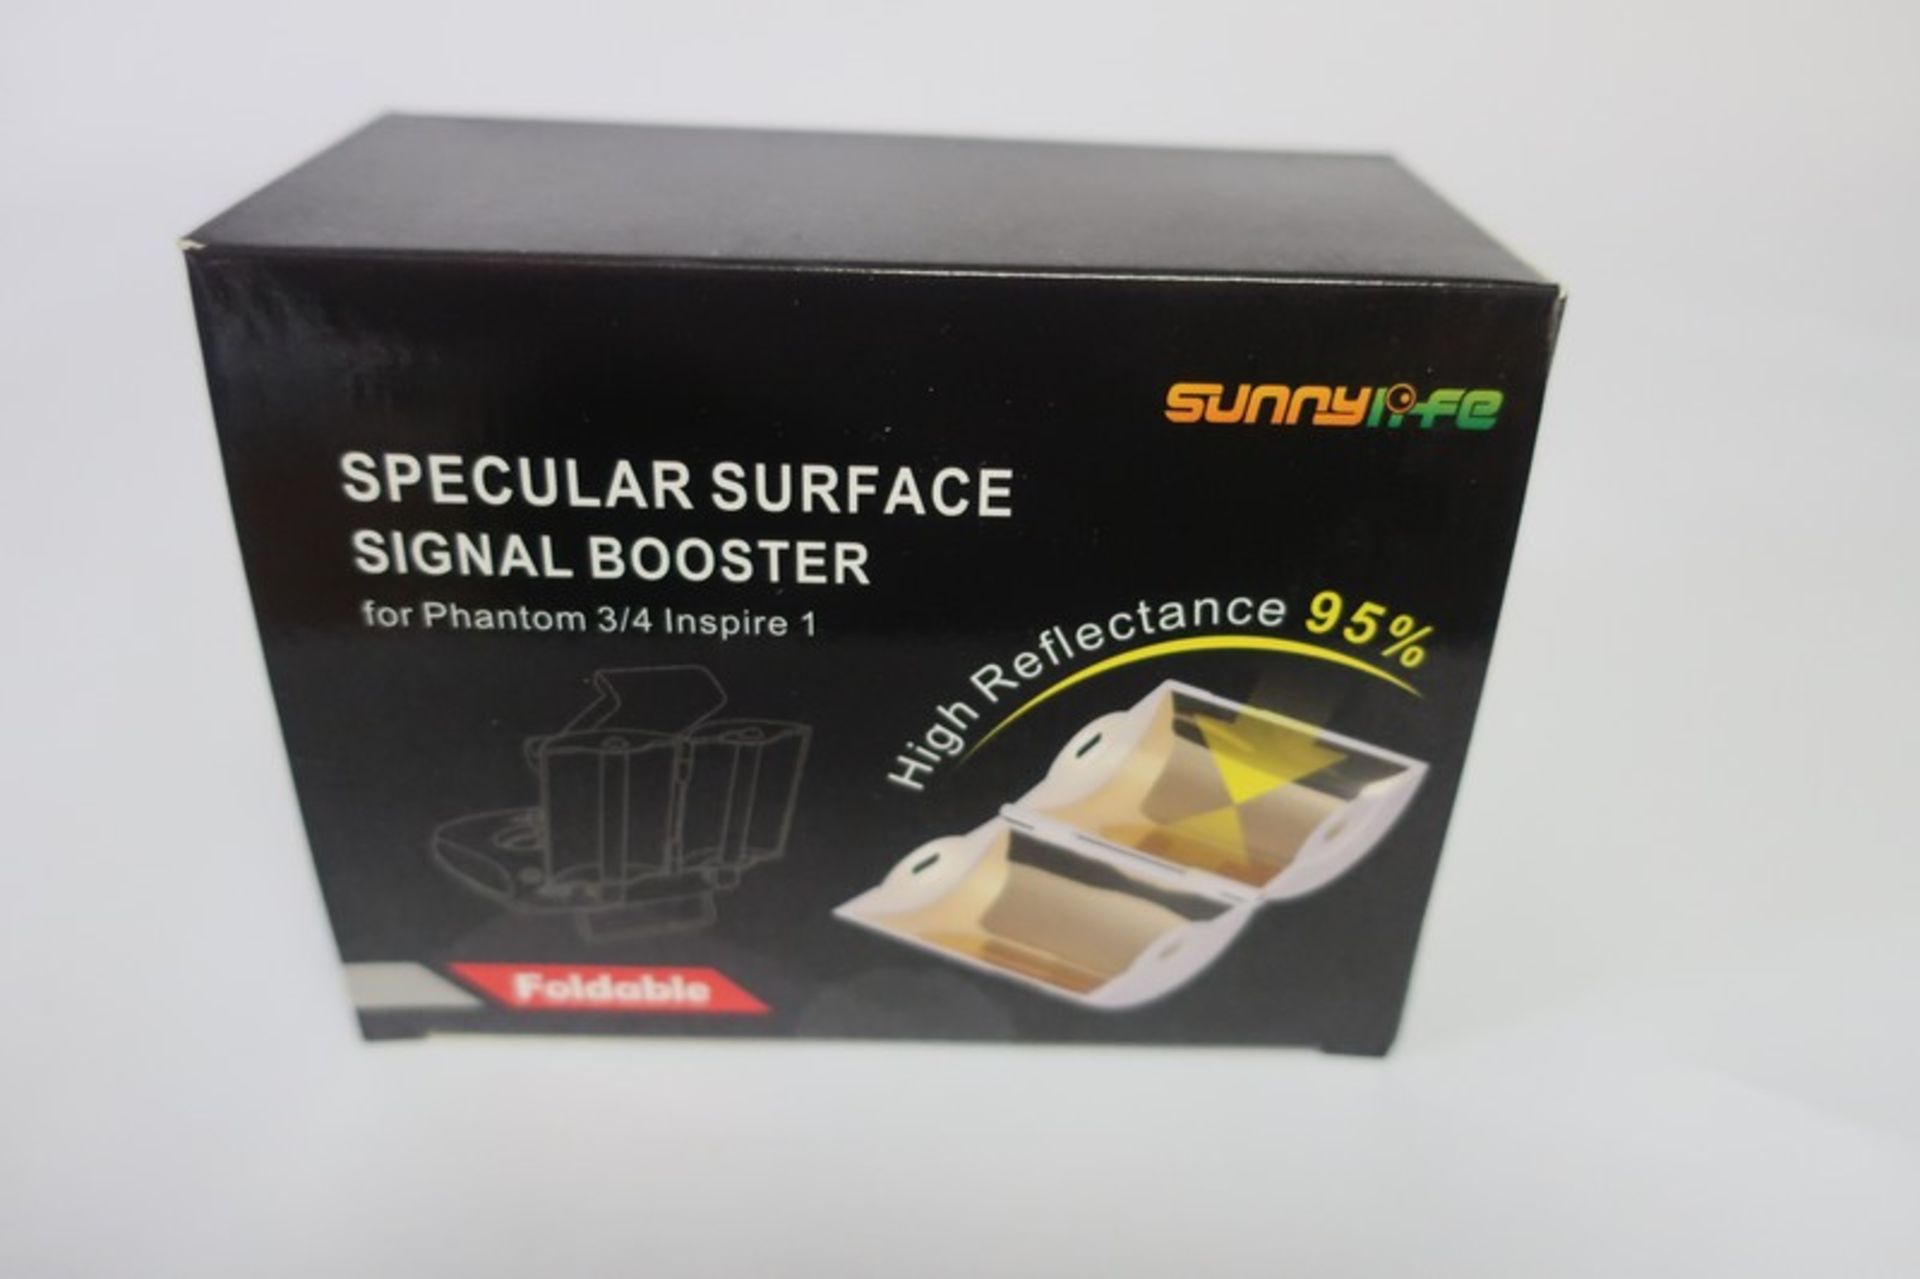 Eight boxed as new Sunnylife specular golden surface signal booster for Phantom 3/4 Inspire 1.